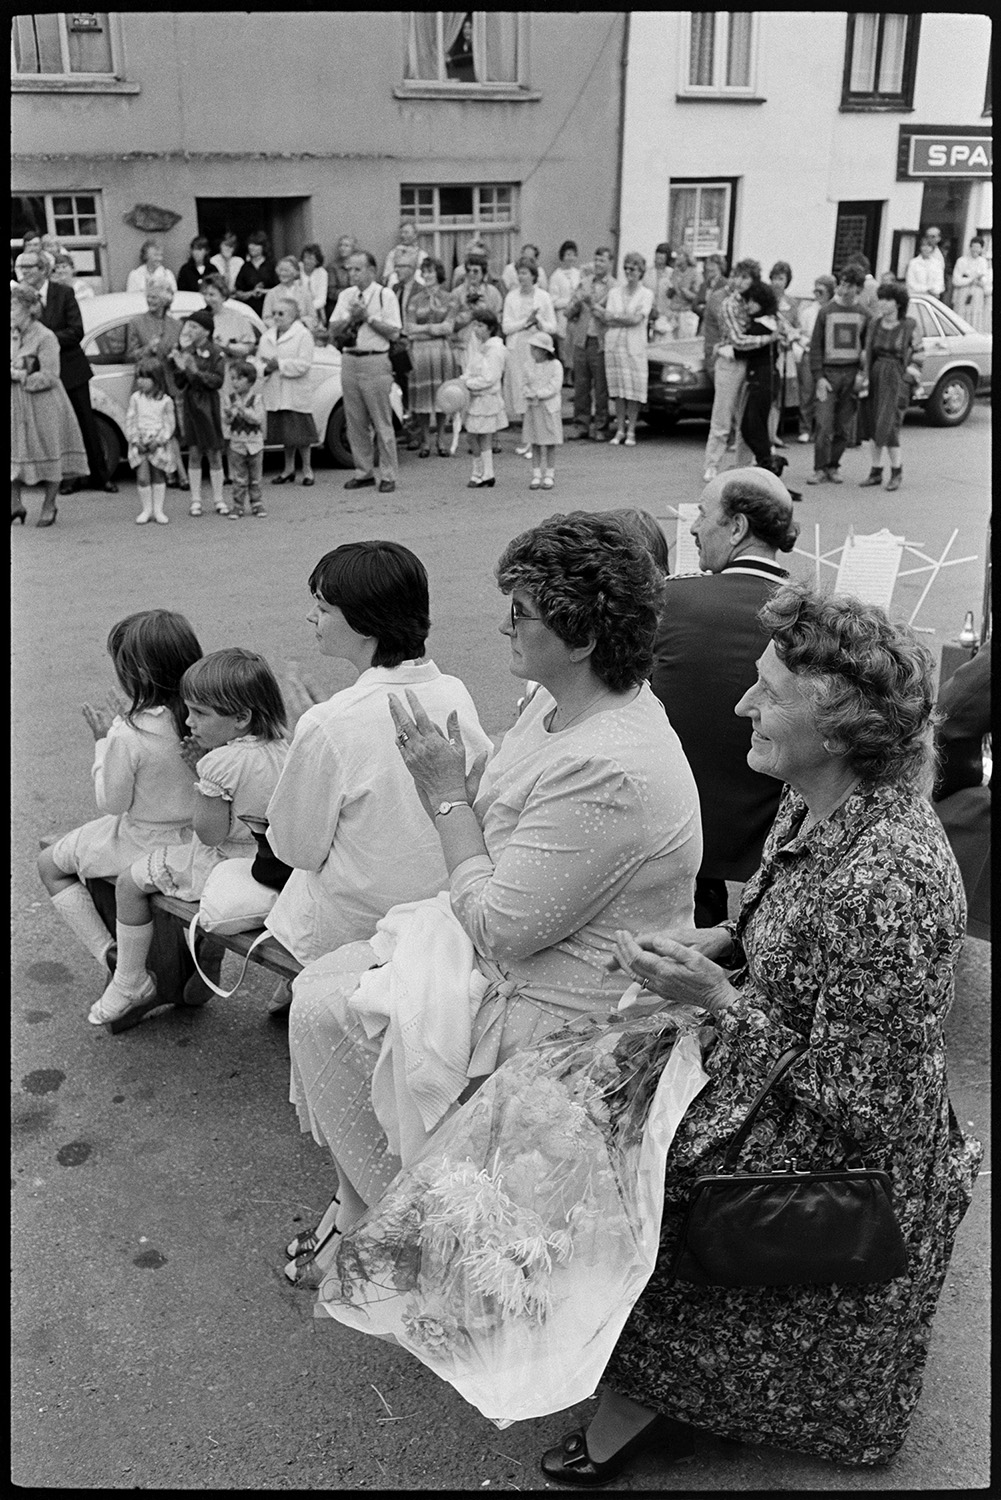 Fair Queen and attendants in village square, spectators waiting around. Photographer. 
[Women and children sat on a bench watching entertainment in Winkleigh village square at Winkleigh Fair. One of the women has a bouquet of flowers on her lap. Other people are watching on the other side of the street, by the Spar shop.]